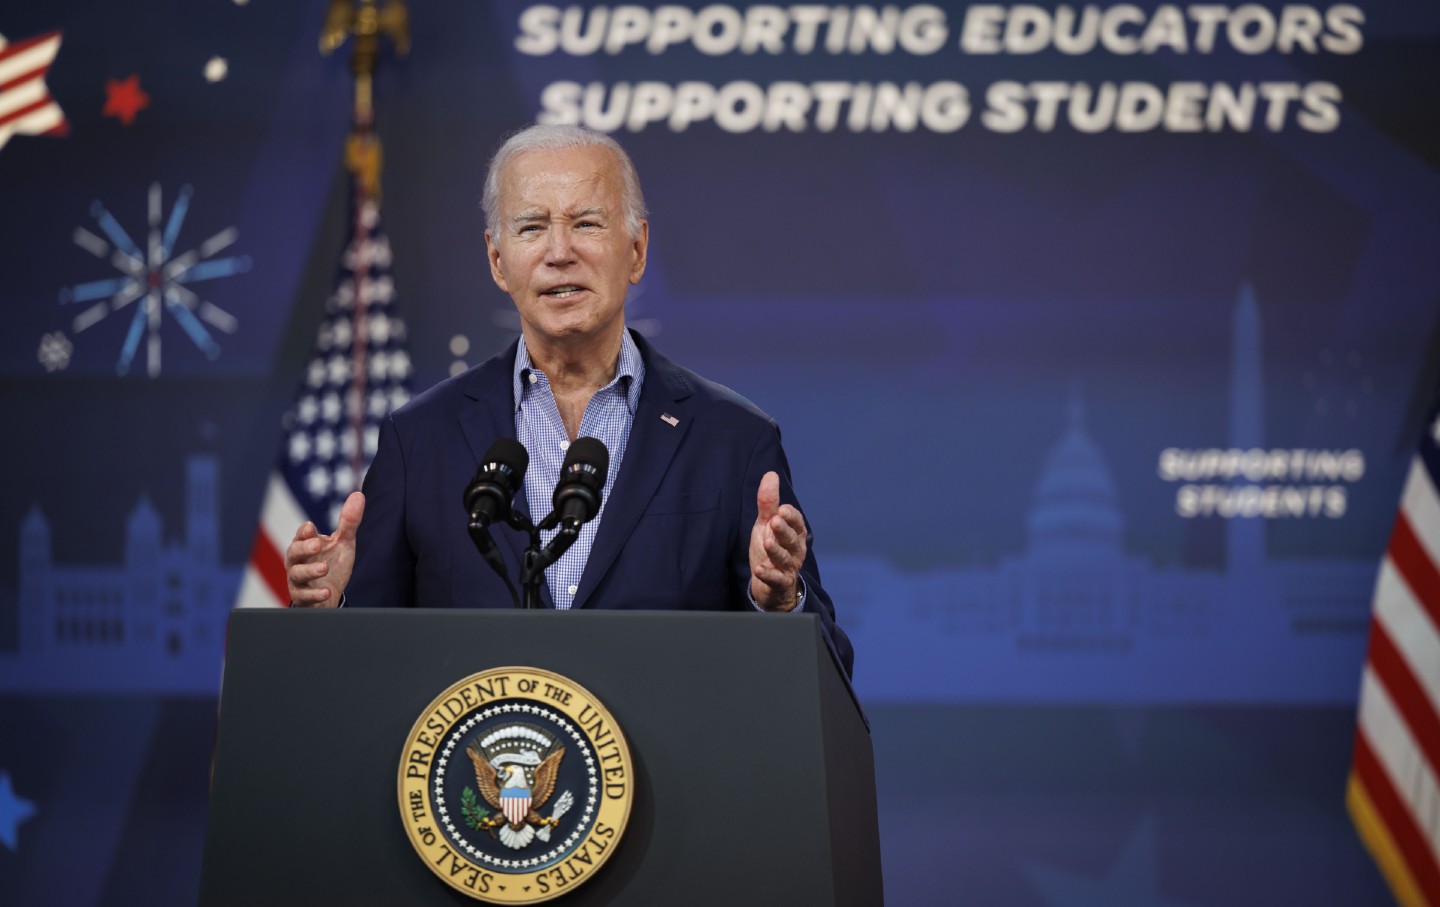 President Joe Biden speaks during a National Education Association event in the Eisenhower Executive Office Building in Washington, D.C., on July 4, 2023.